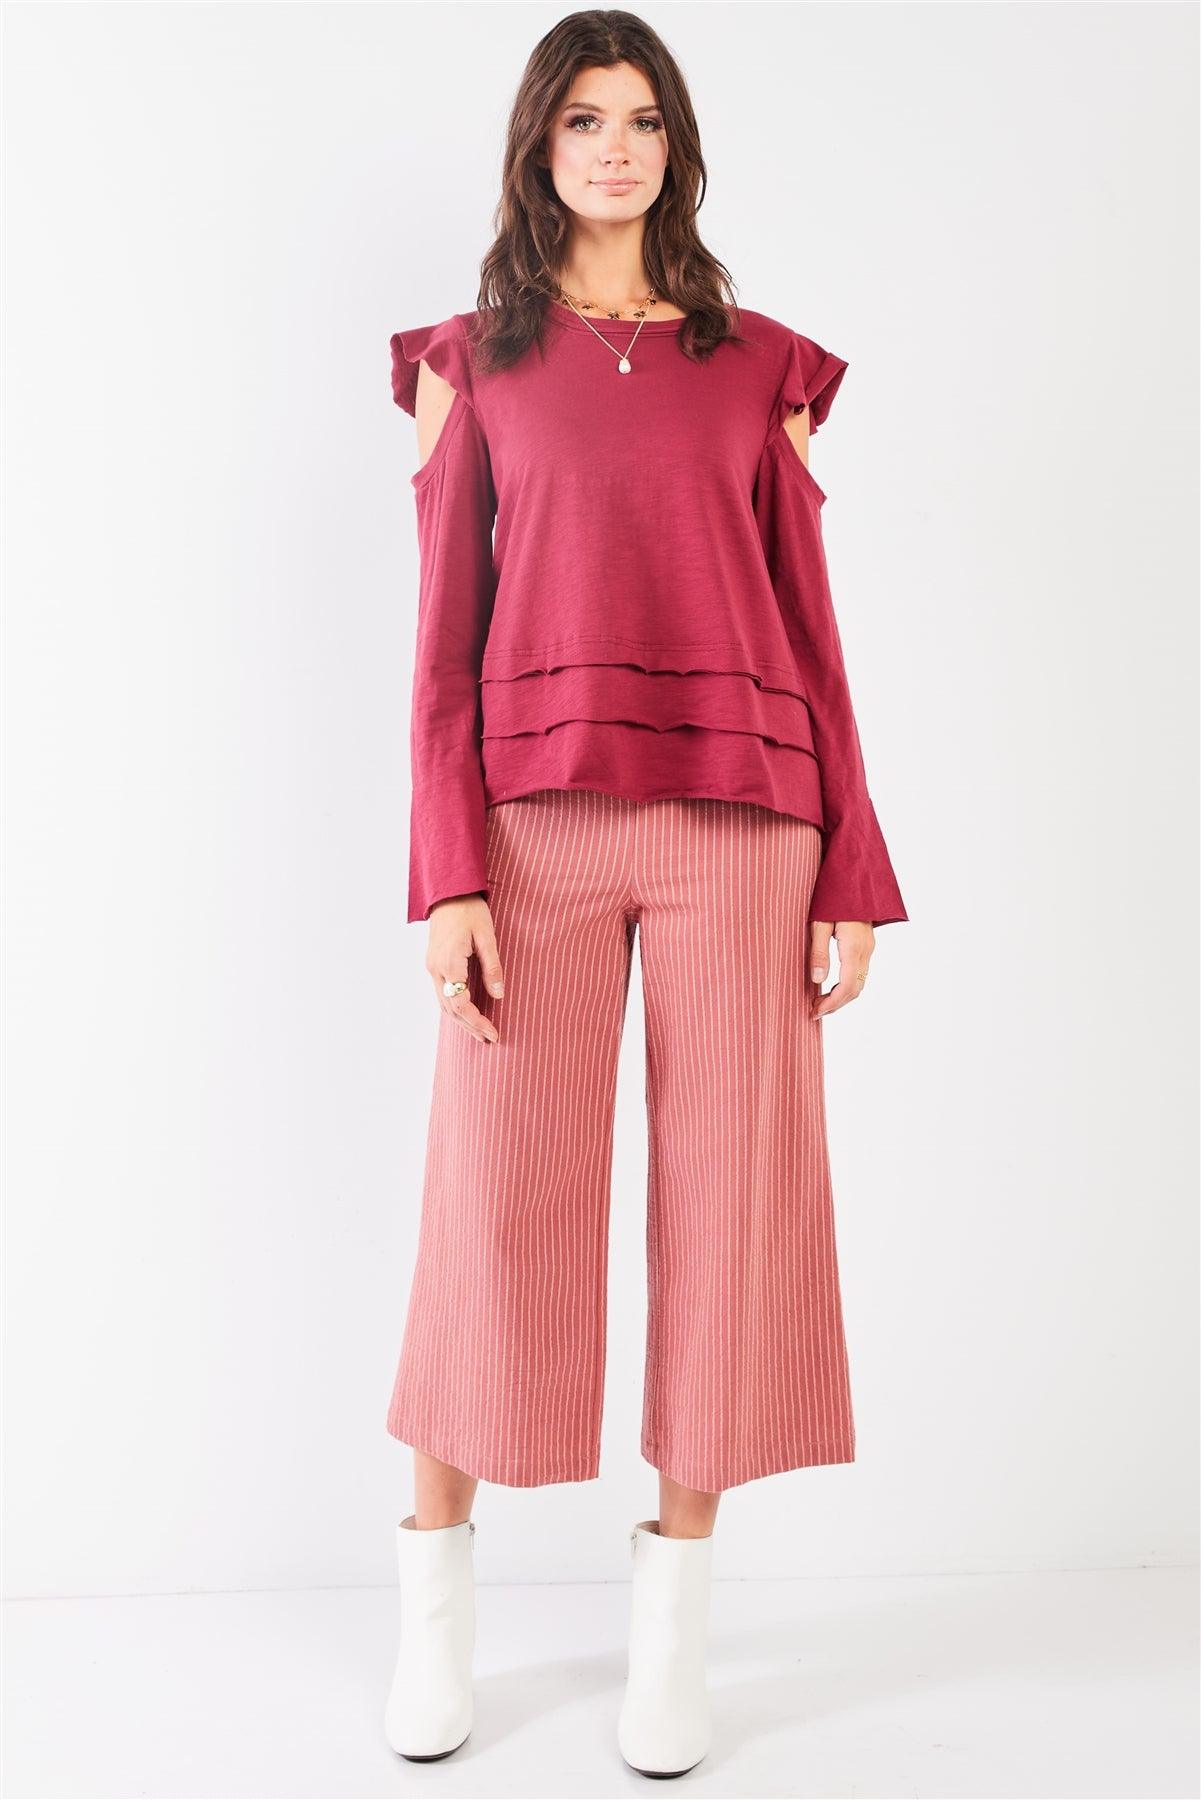 Wine Cut-Out Shoulder Bell Sleeve Raw Edge Detail Layered Hem Top /2-2-2